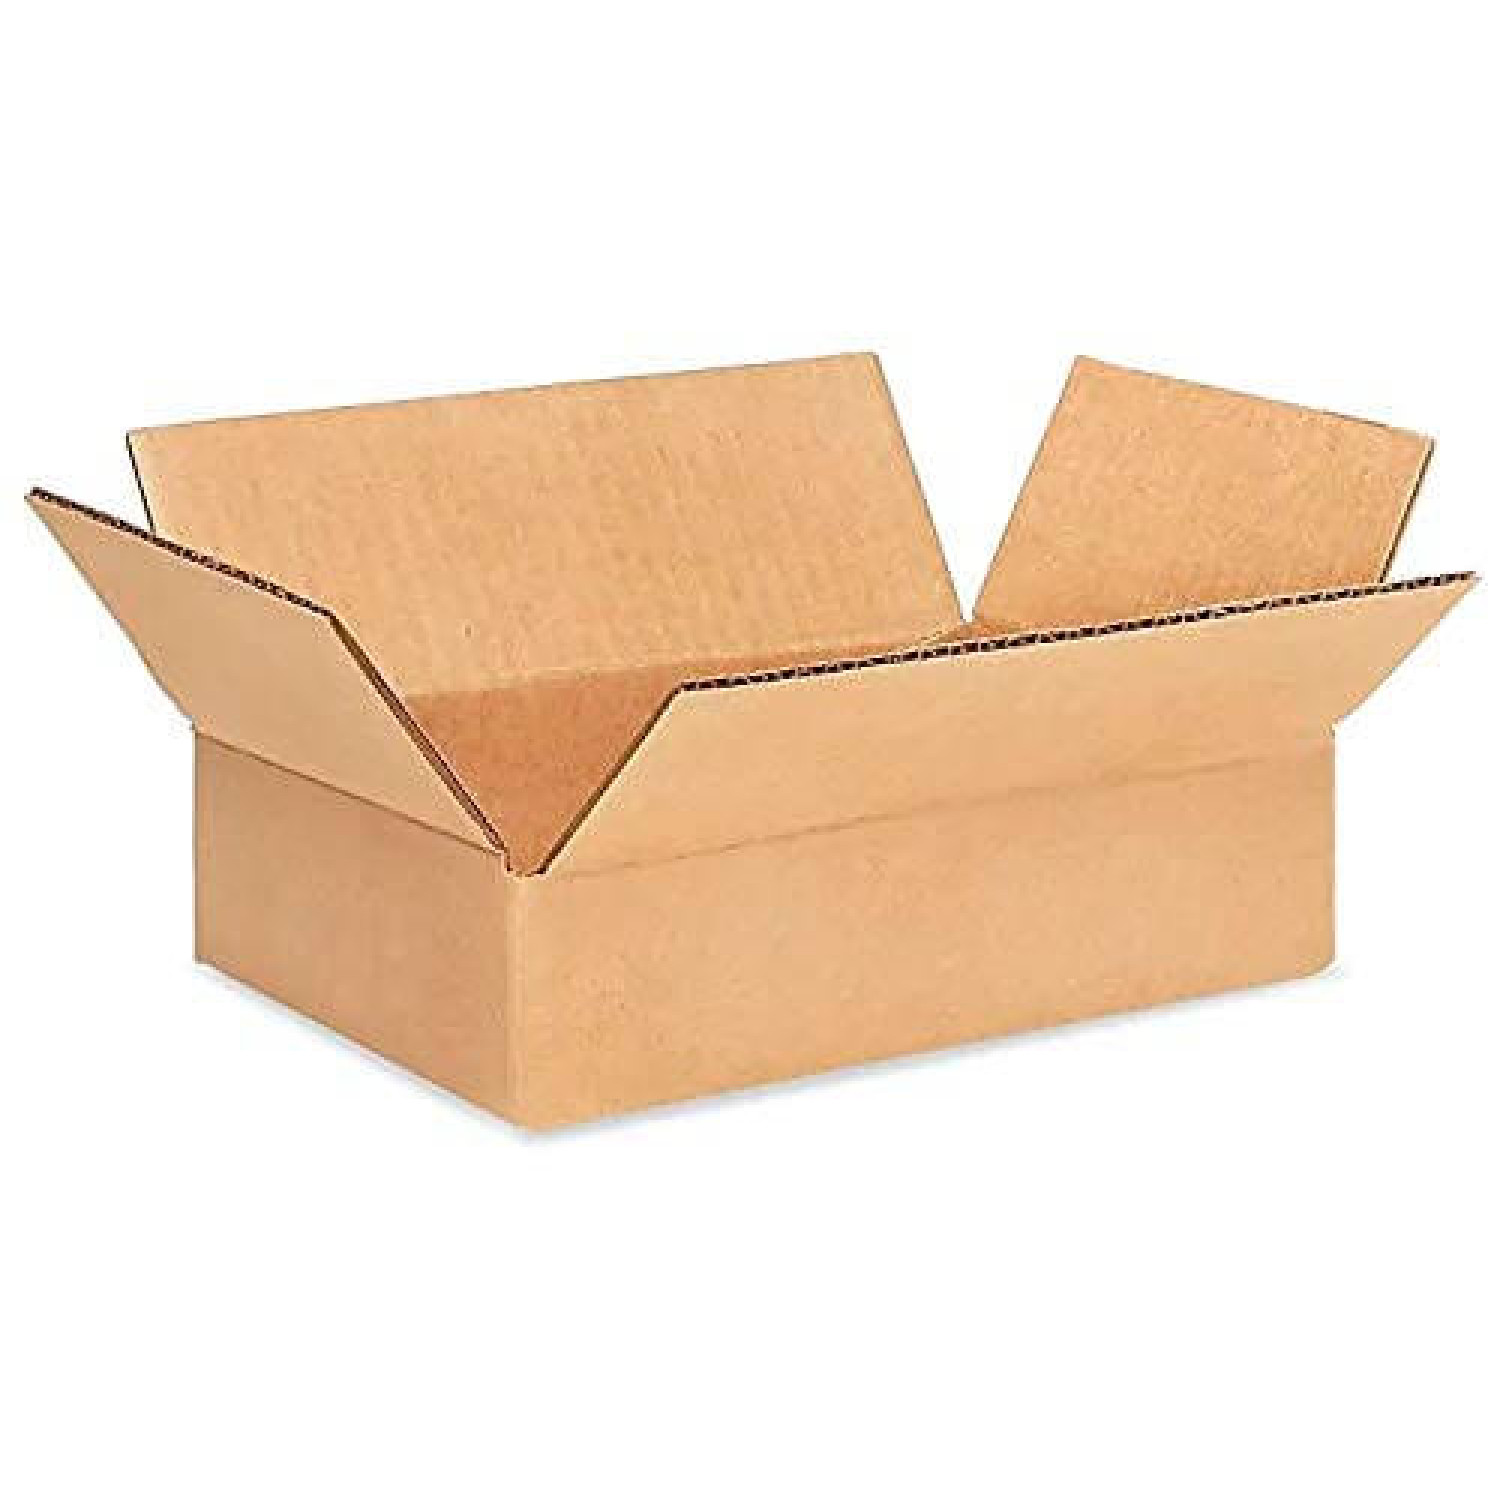 https://idlpack.com/image/cache/catalog/Products/Boxes/9L-6W-2H-Small-Cardboard-Box-1500x1500.jpg